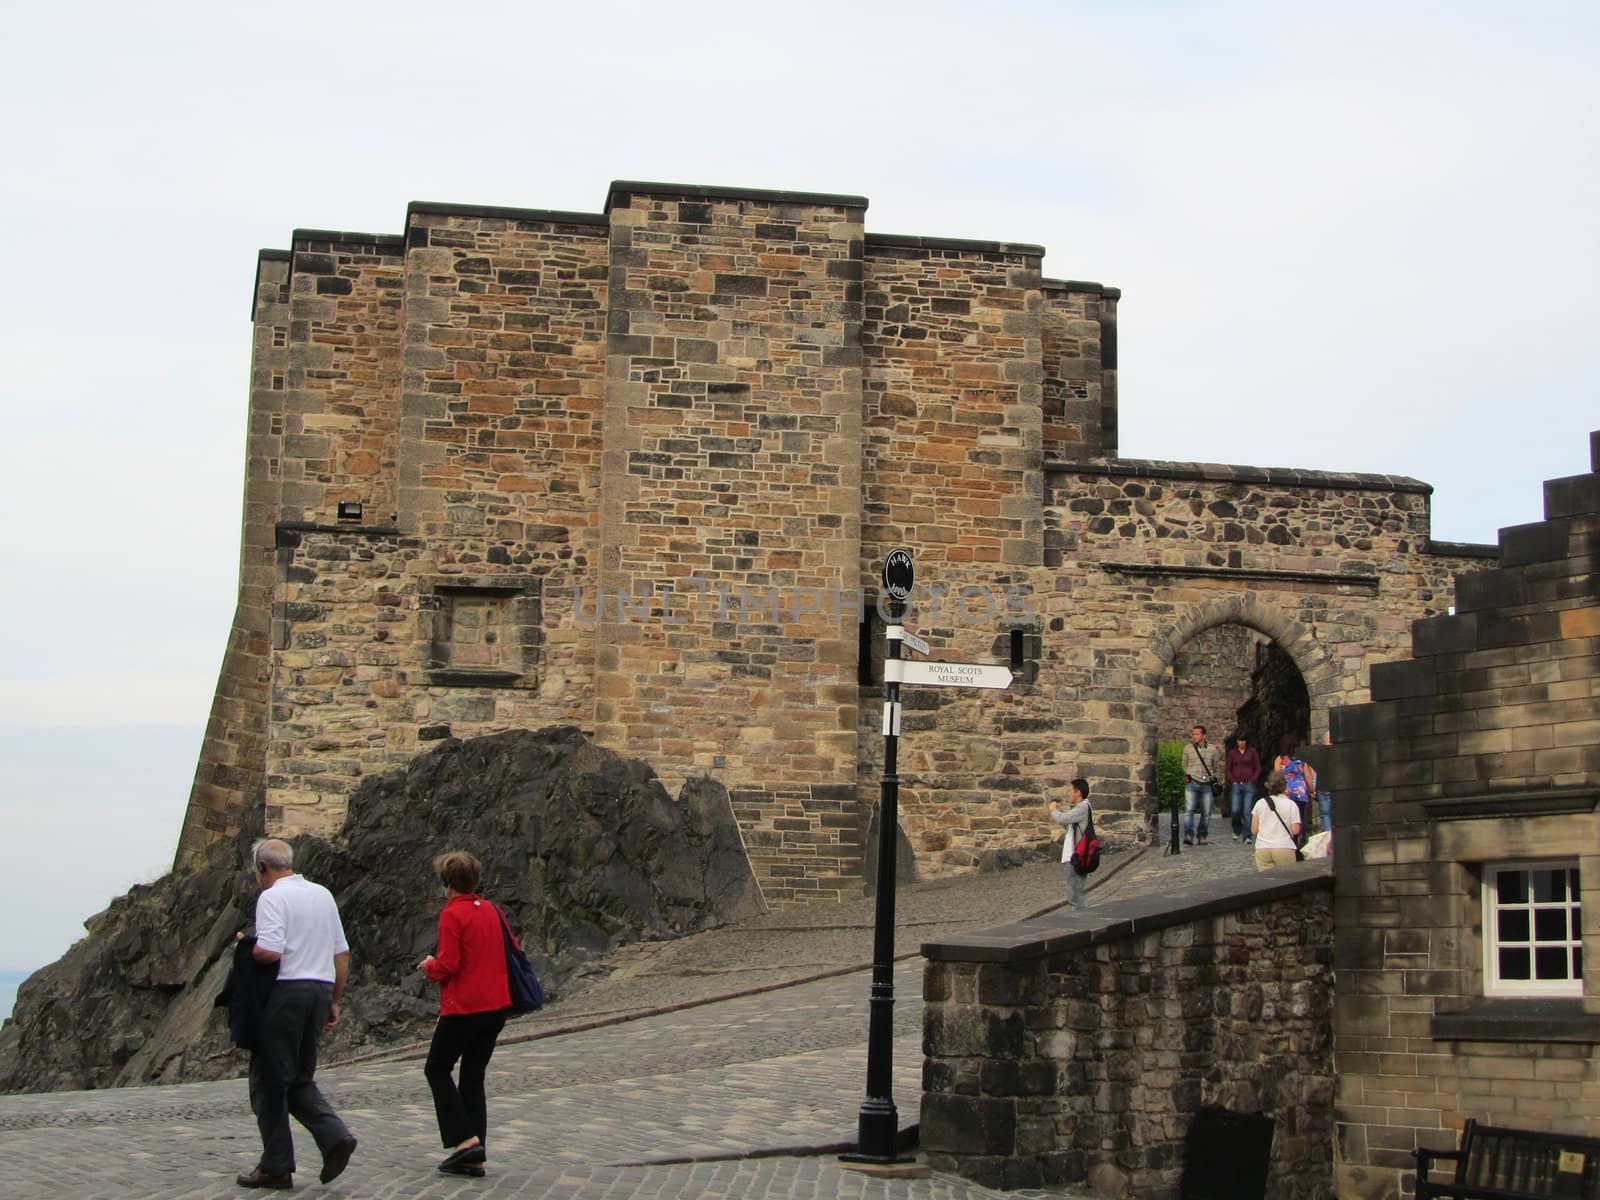 Unidentified visitors at Edinburgh Castle on September 4, 2010 i by green308